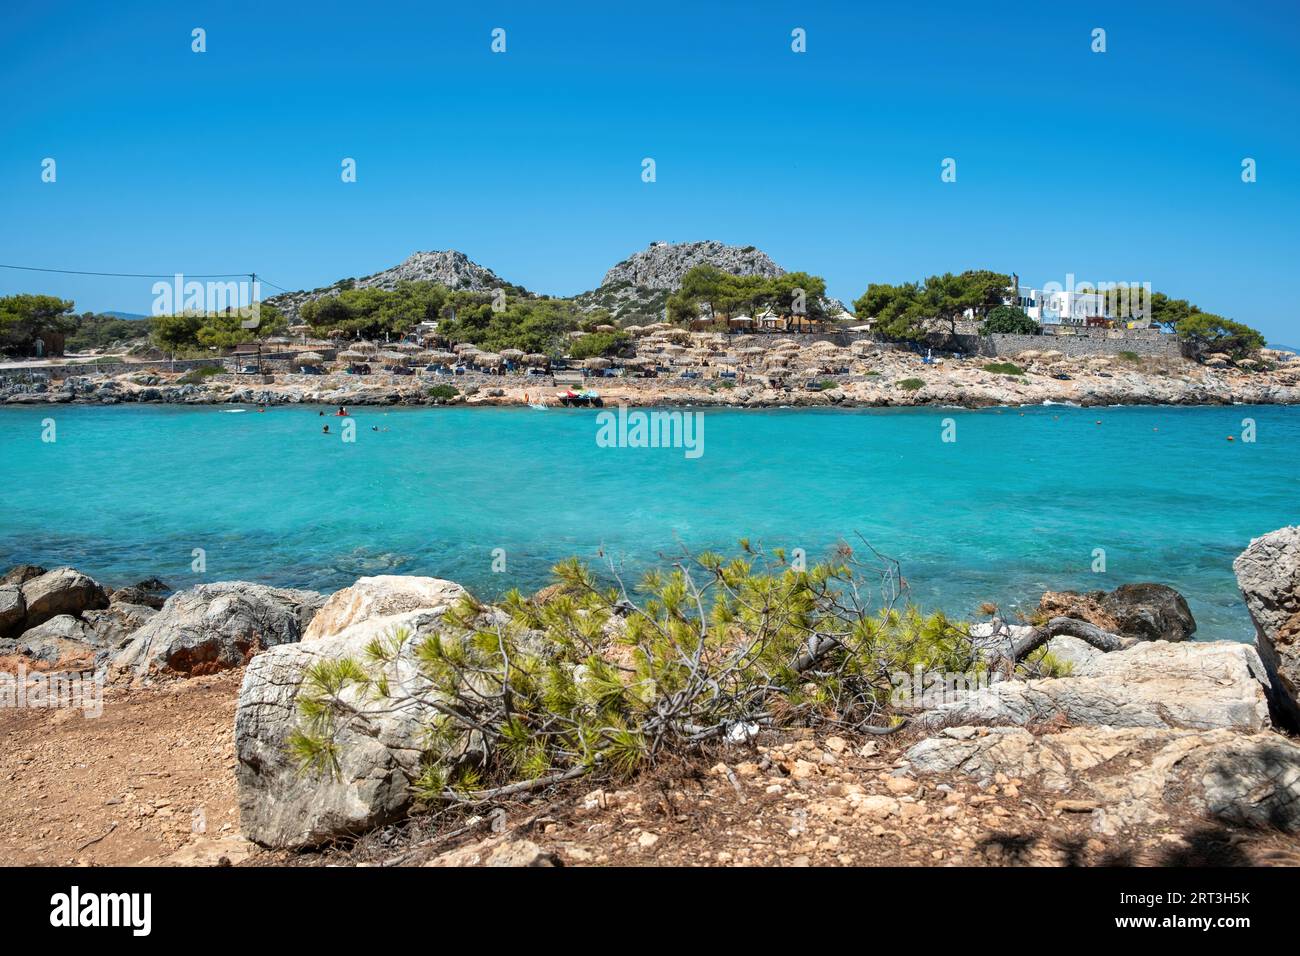 Greece Aponisos beach, destination Agistri island. Rocky beach with pine tree, people swim in clear sea water, blue sky background. Summer vacation. Stock Photo